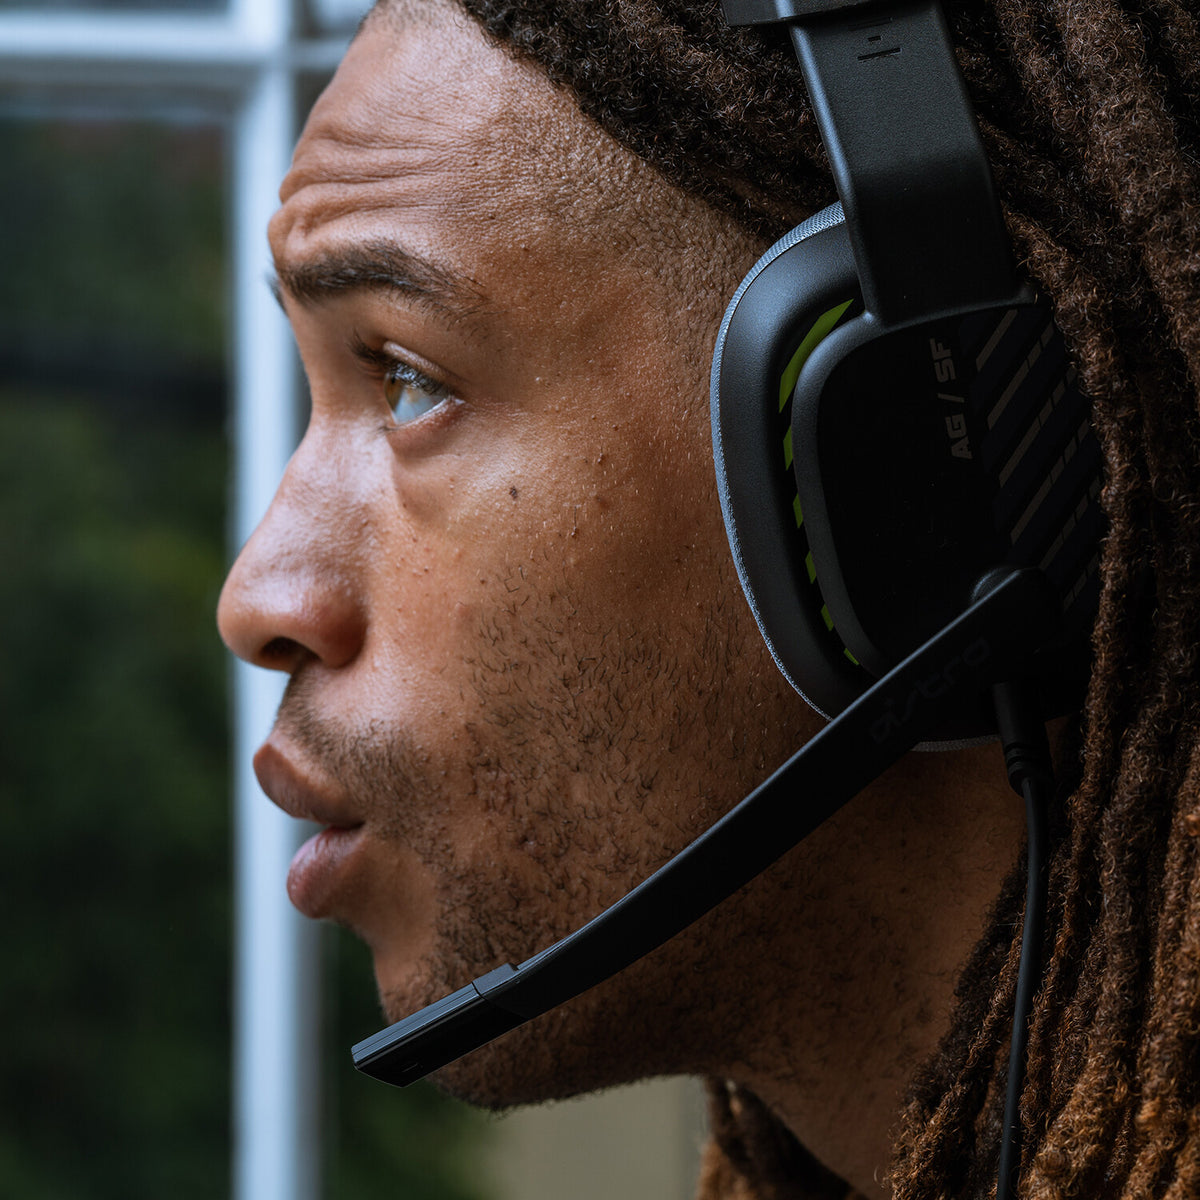 ASTRO Gaming A10 - Wired Gaming Headset